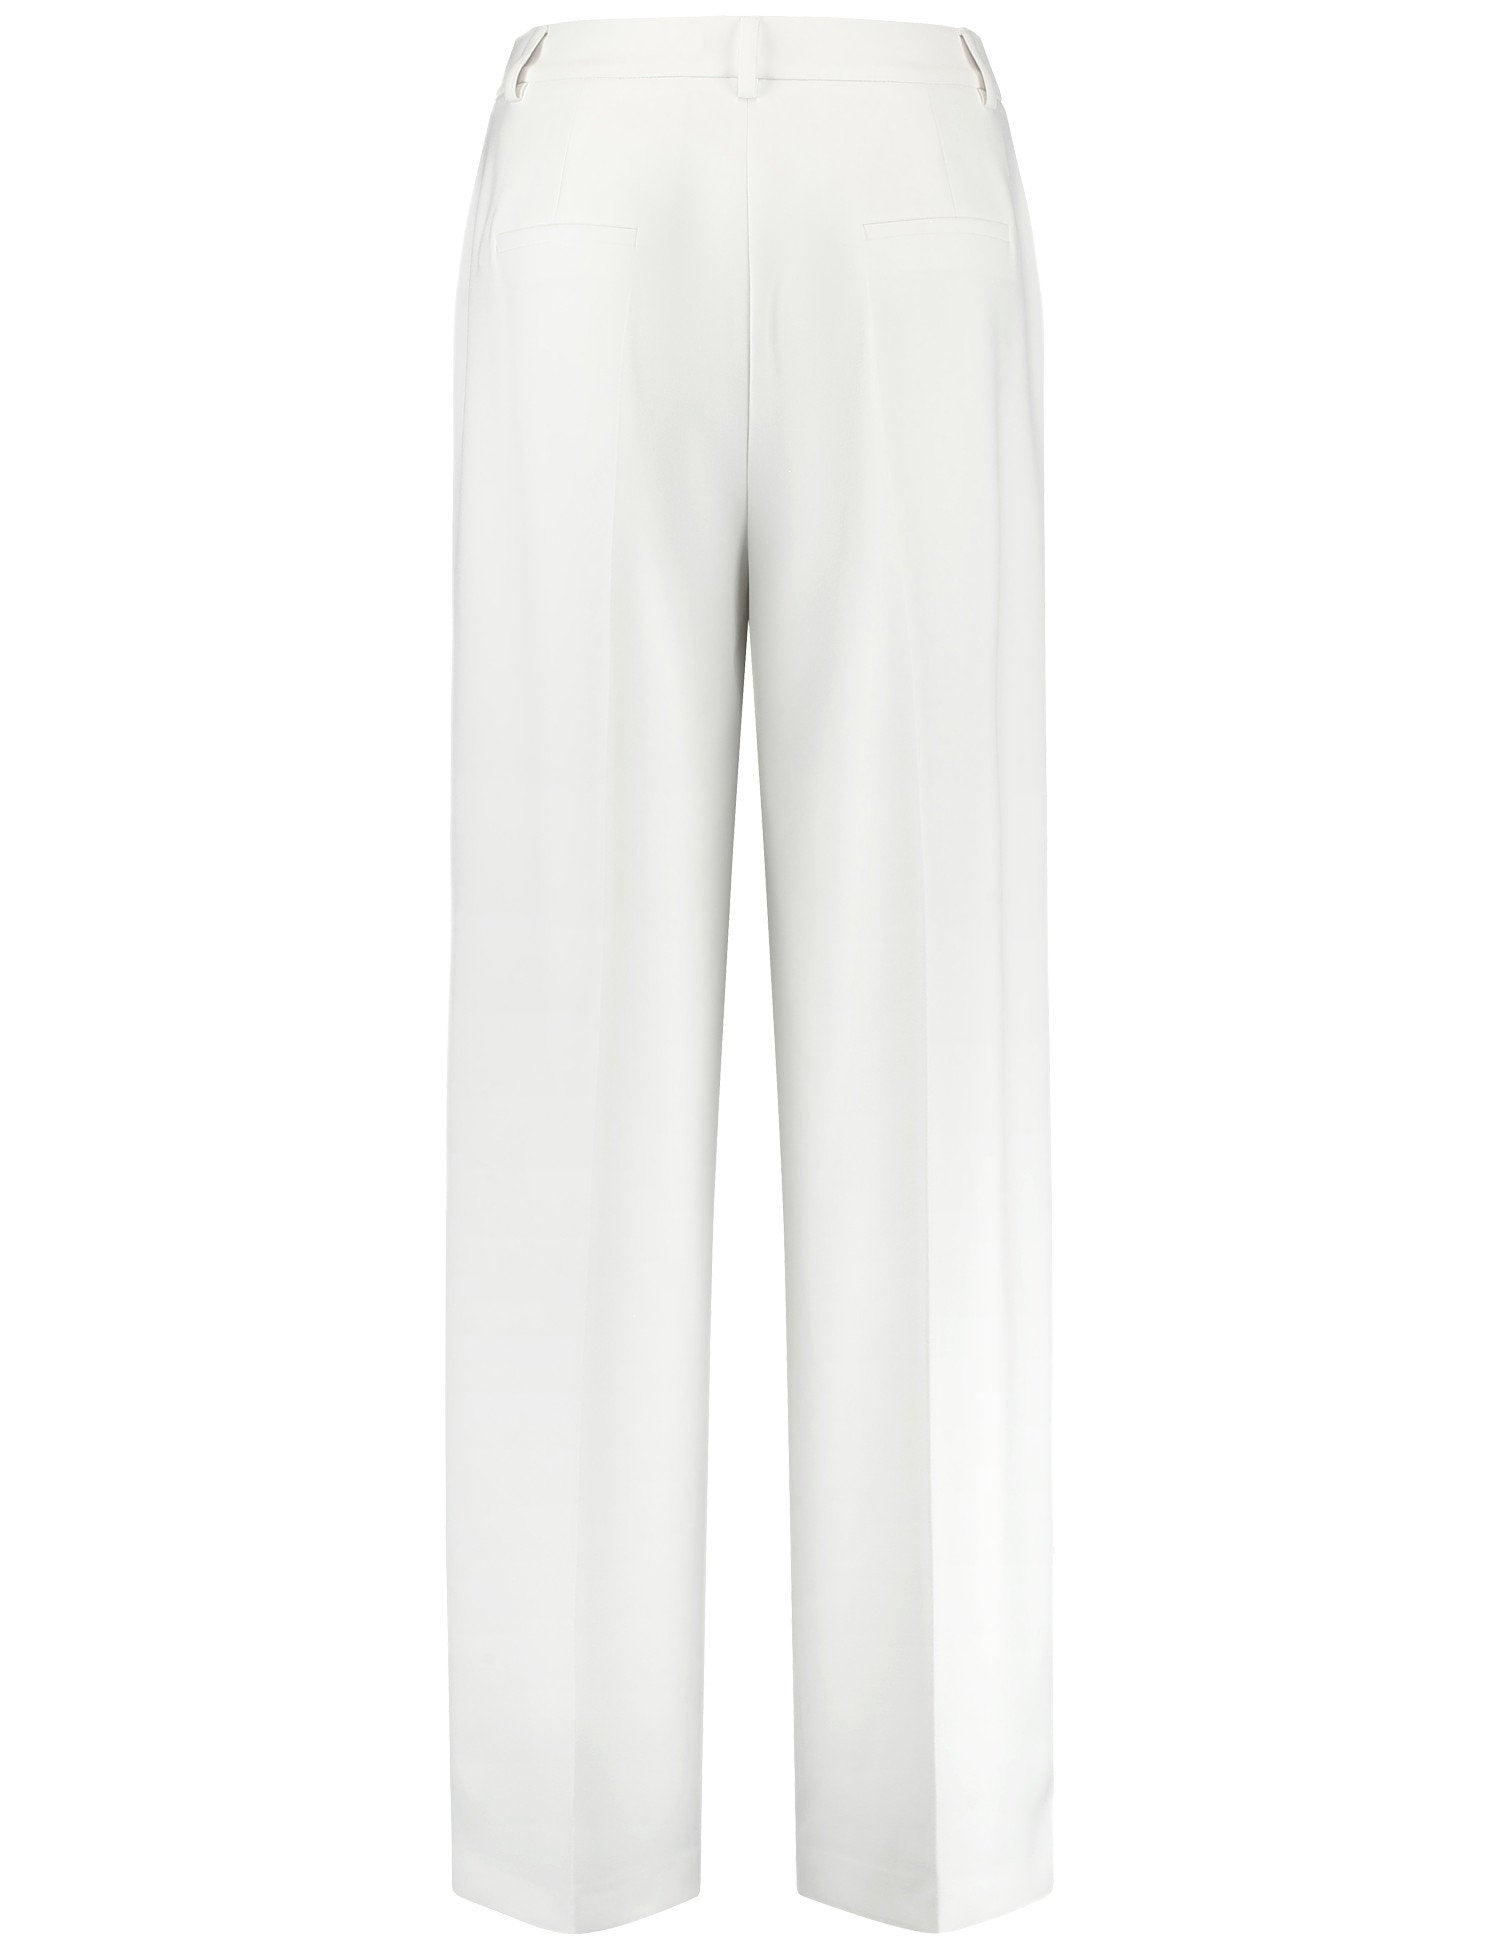 Elegant Trousers With A Wide Leg_520334-11081_9600_08